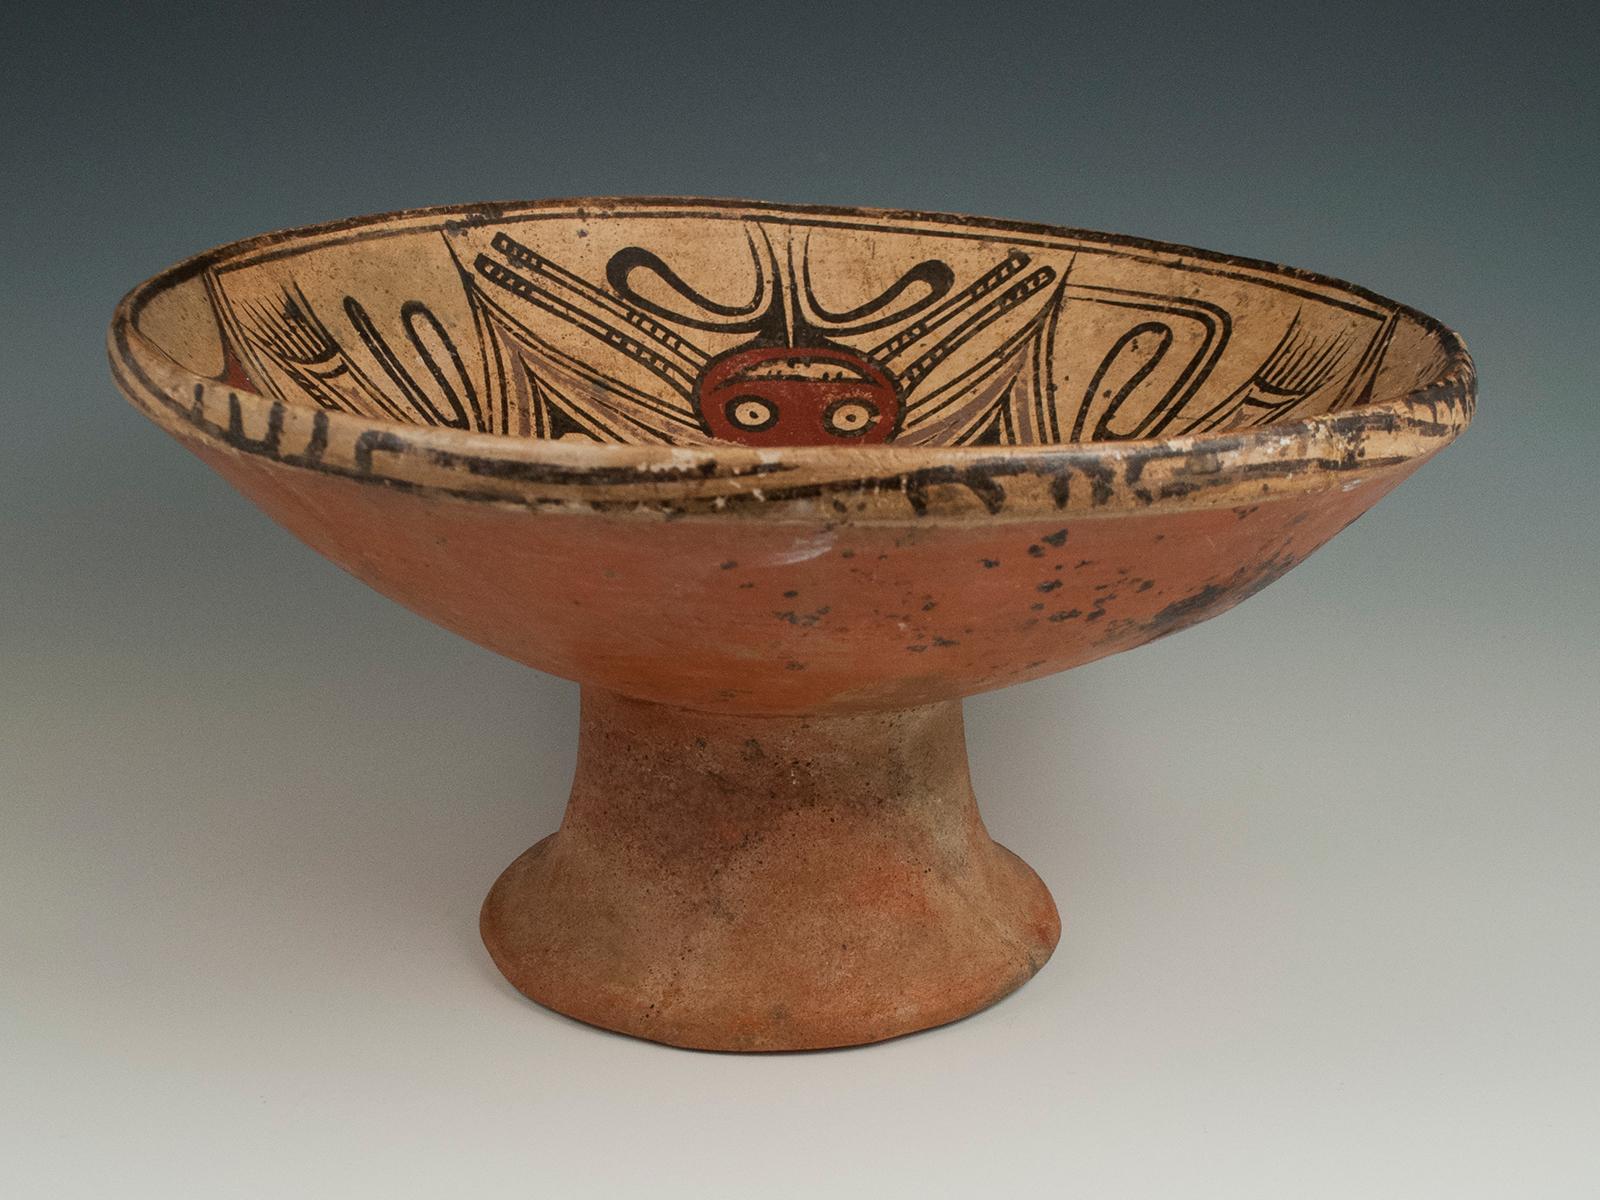 Earthenware bat pedestal dish, Coclé Culture, Panama

Earthenware dish on a low pedestal foot; the dish face is painted black, red and purple on a cream ground, each half of the bisected design depicting the mirrored image of a stylized bat. There